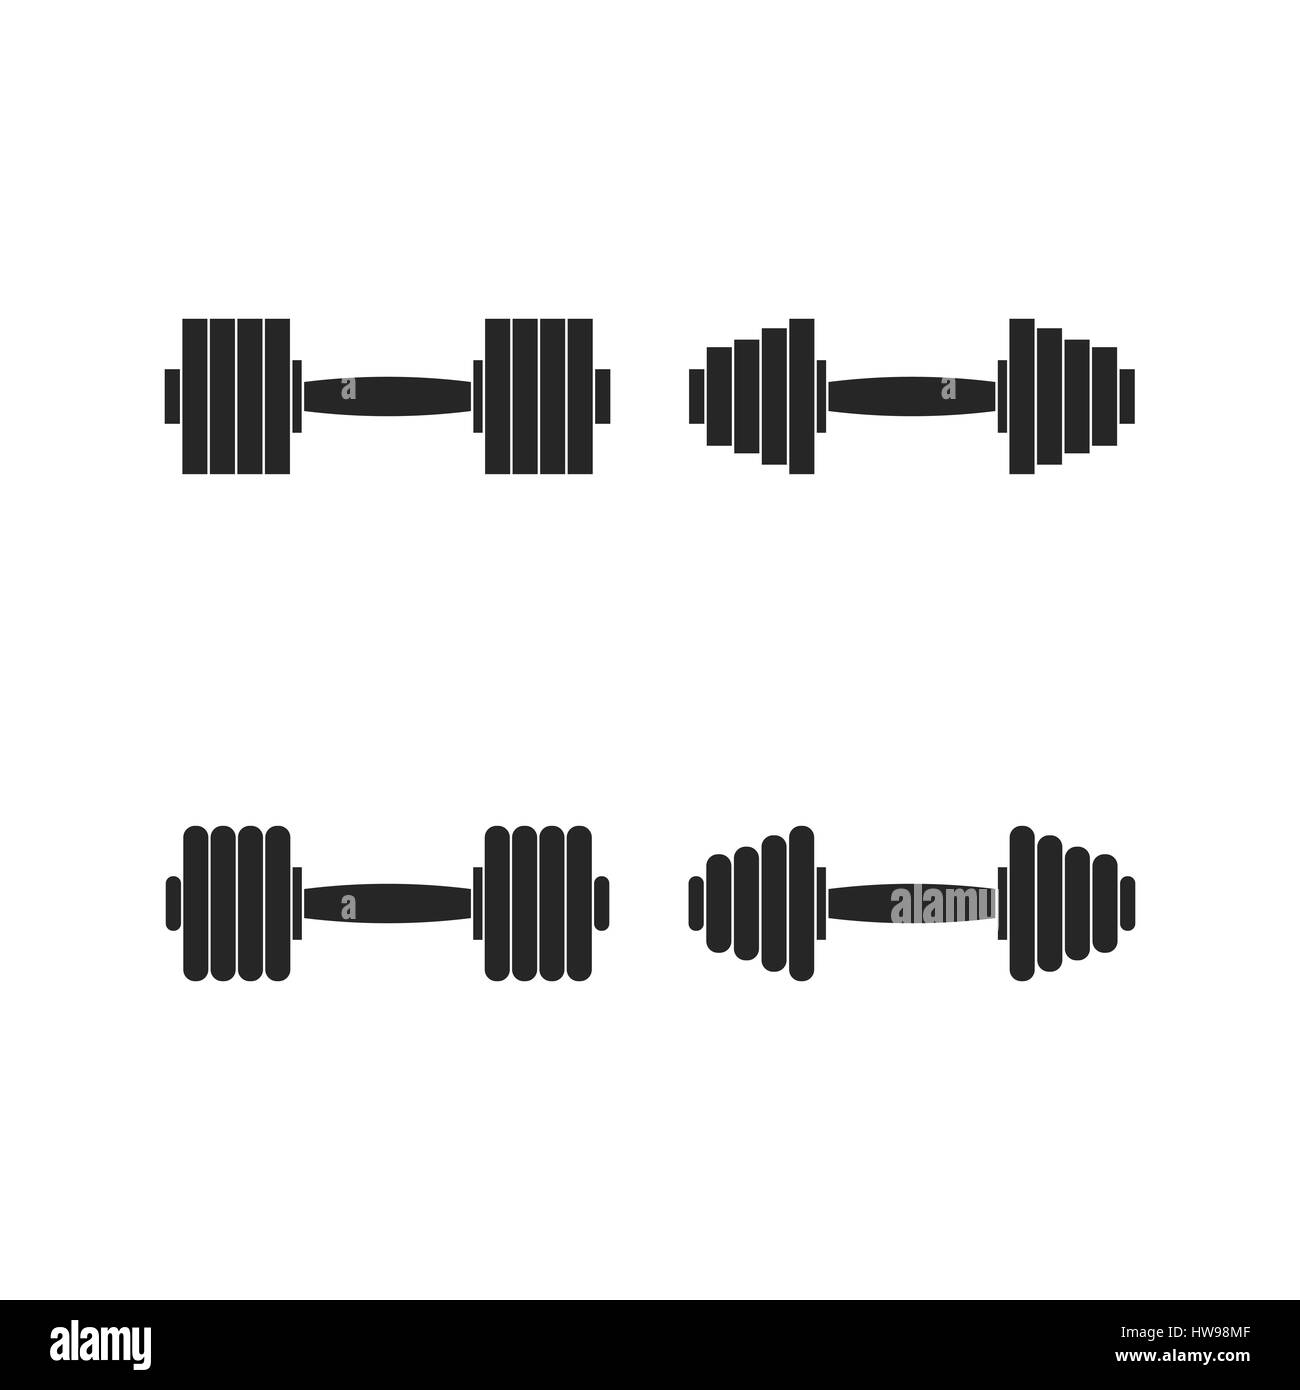 A set of gray icons dumbbell isolated on a white background, elements of sports equipment design, vector illustration. Stock Vector